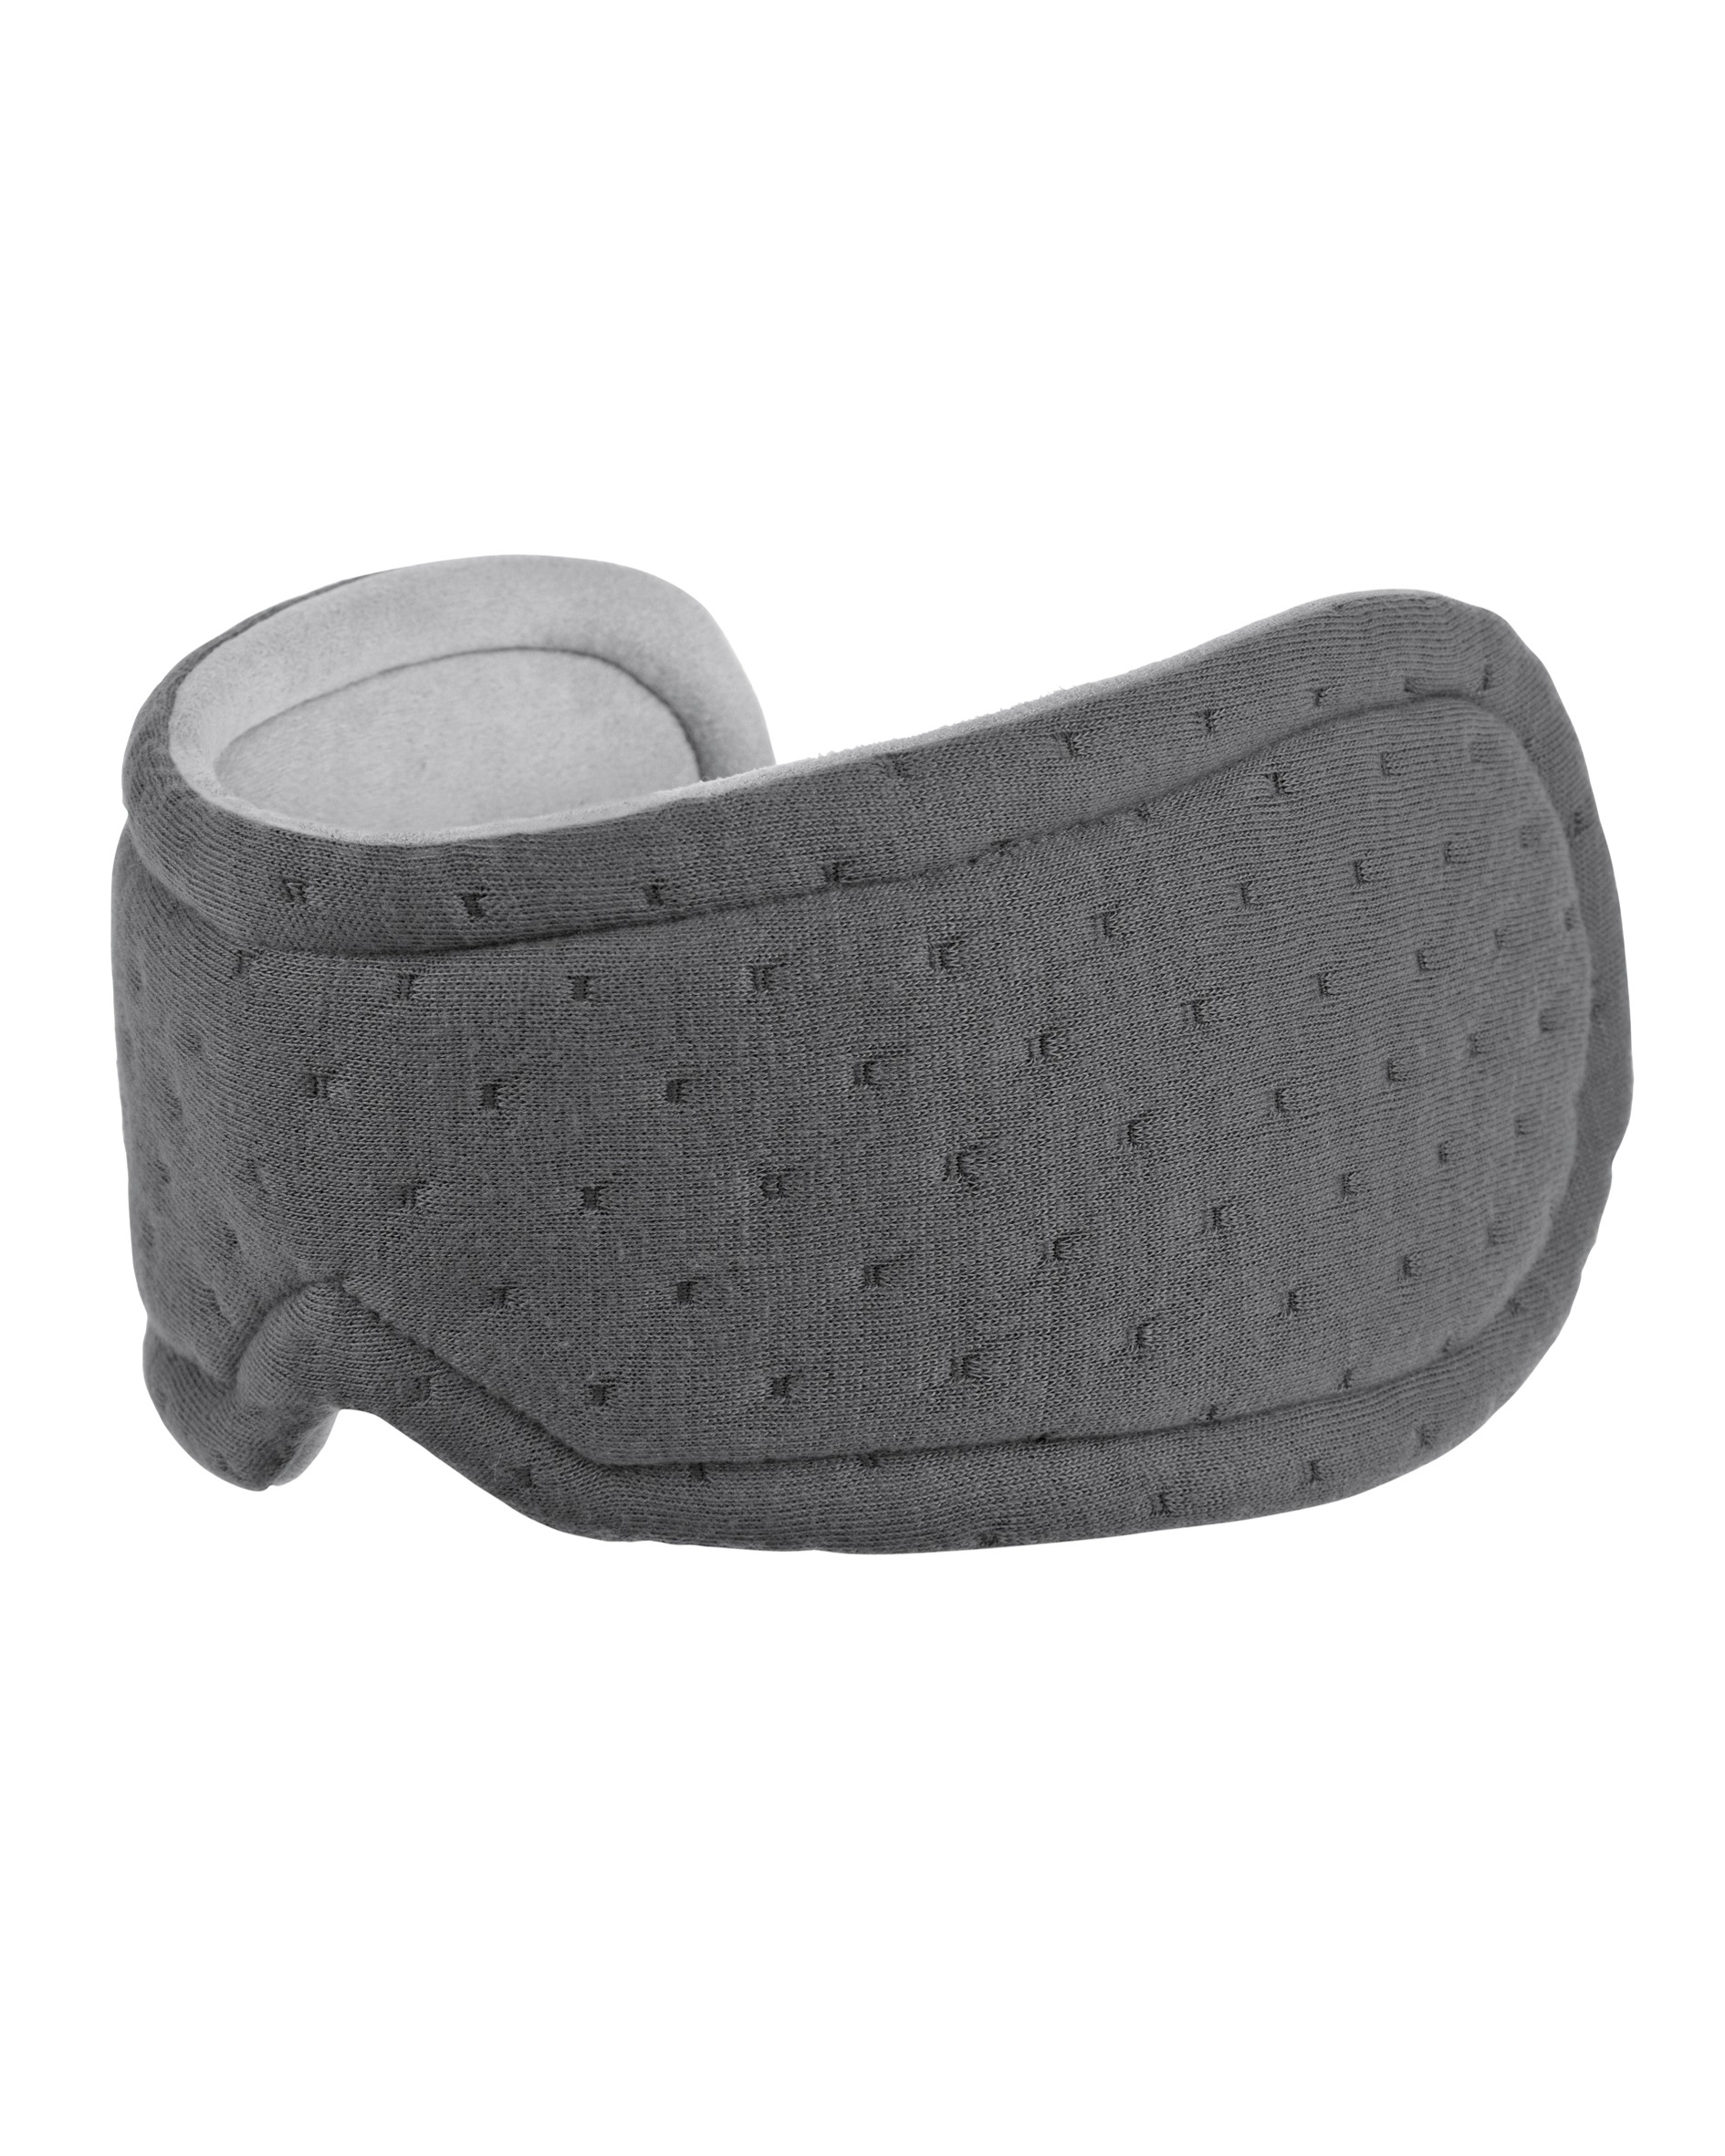 Picture of Be Relax Anti Fatigue Sleep Mask Grey